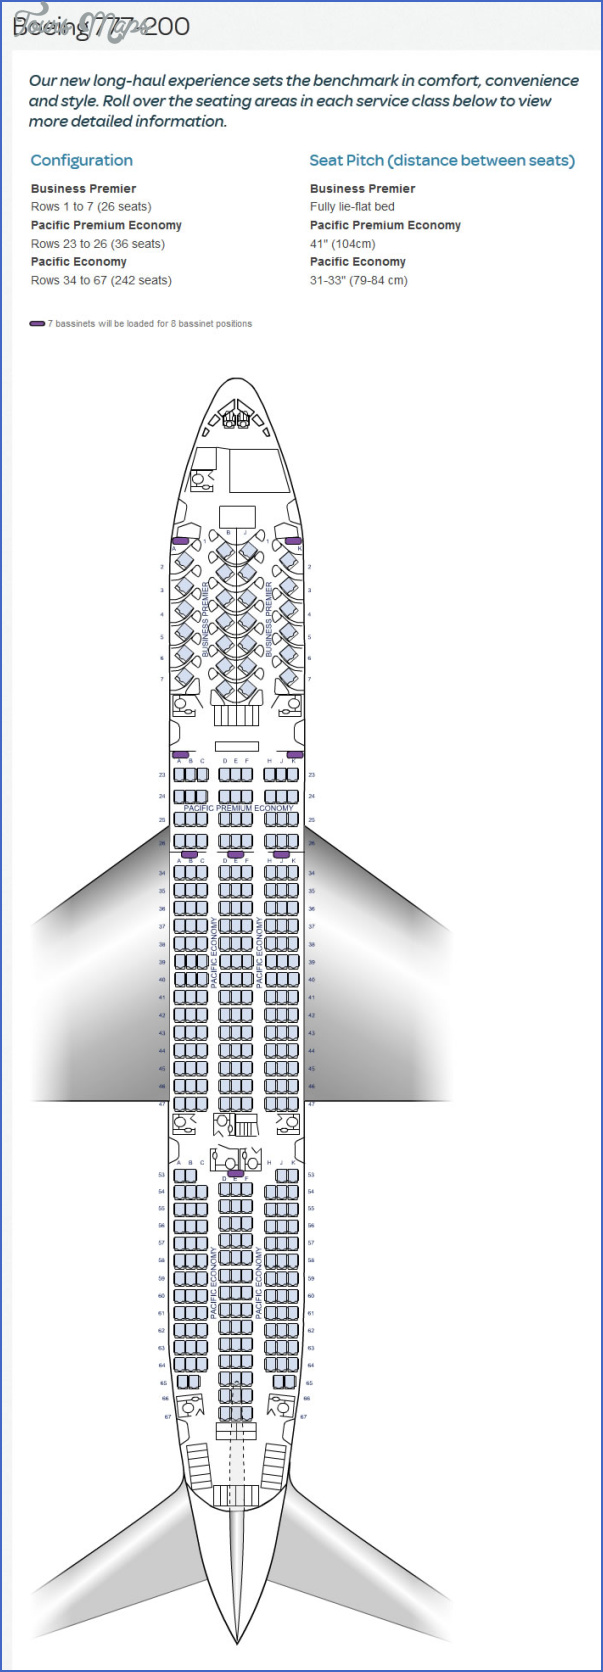 777 200 Air New Zealand Seat Map